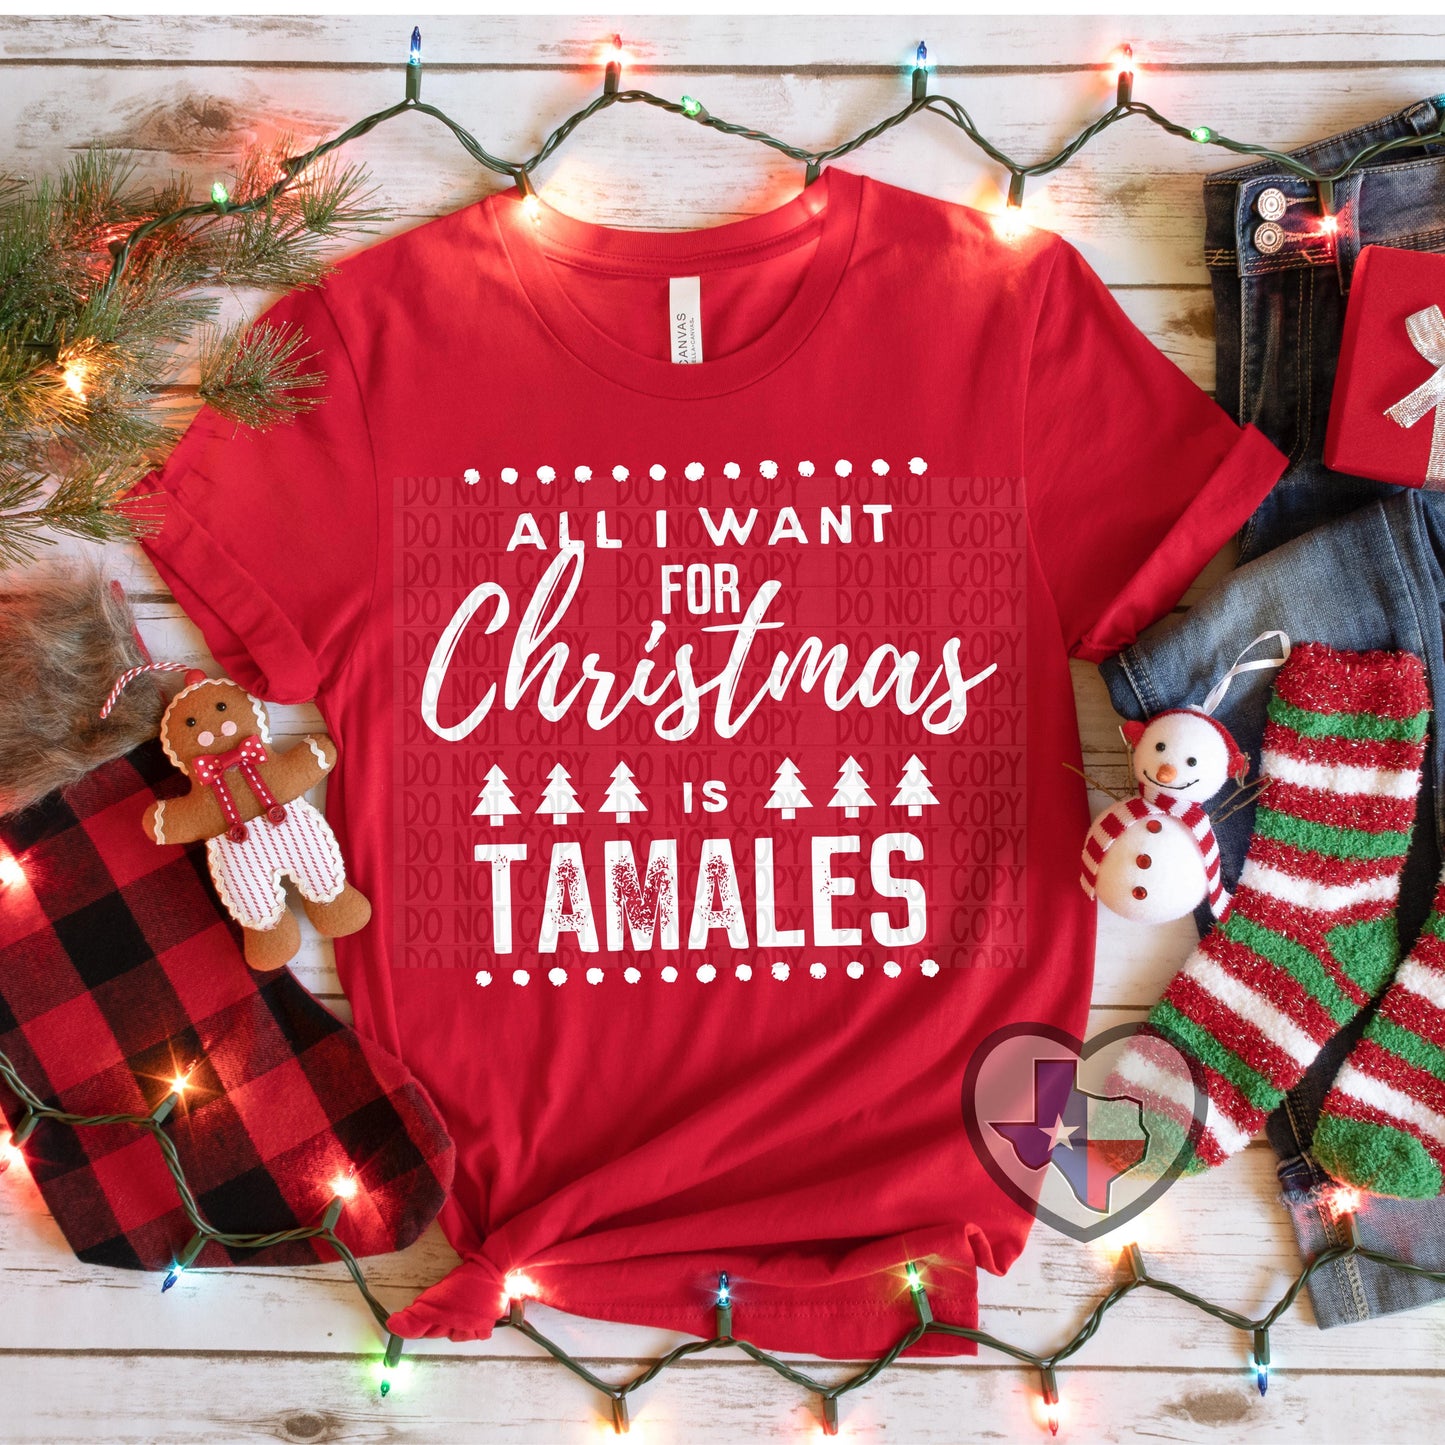 All I Want For Christmas is Tamales *EXCLUSIVE* DTF